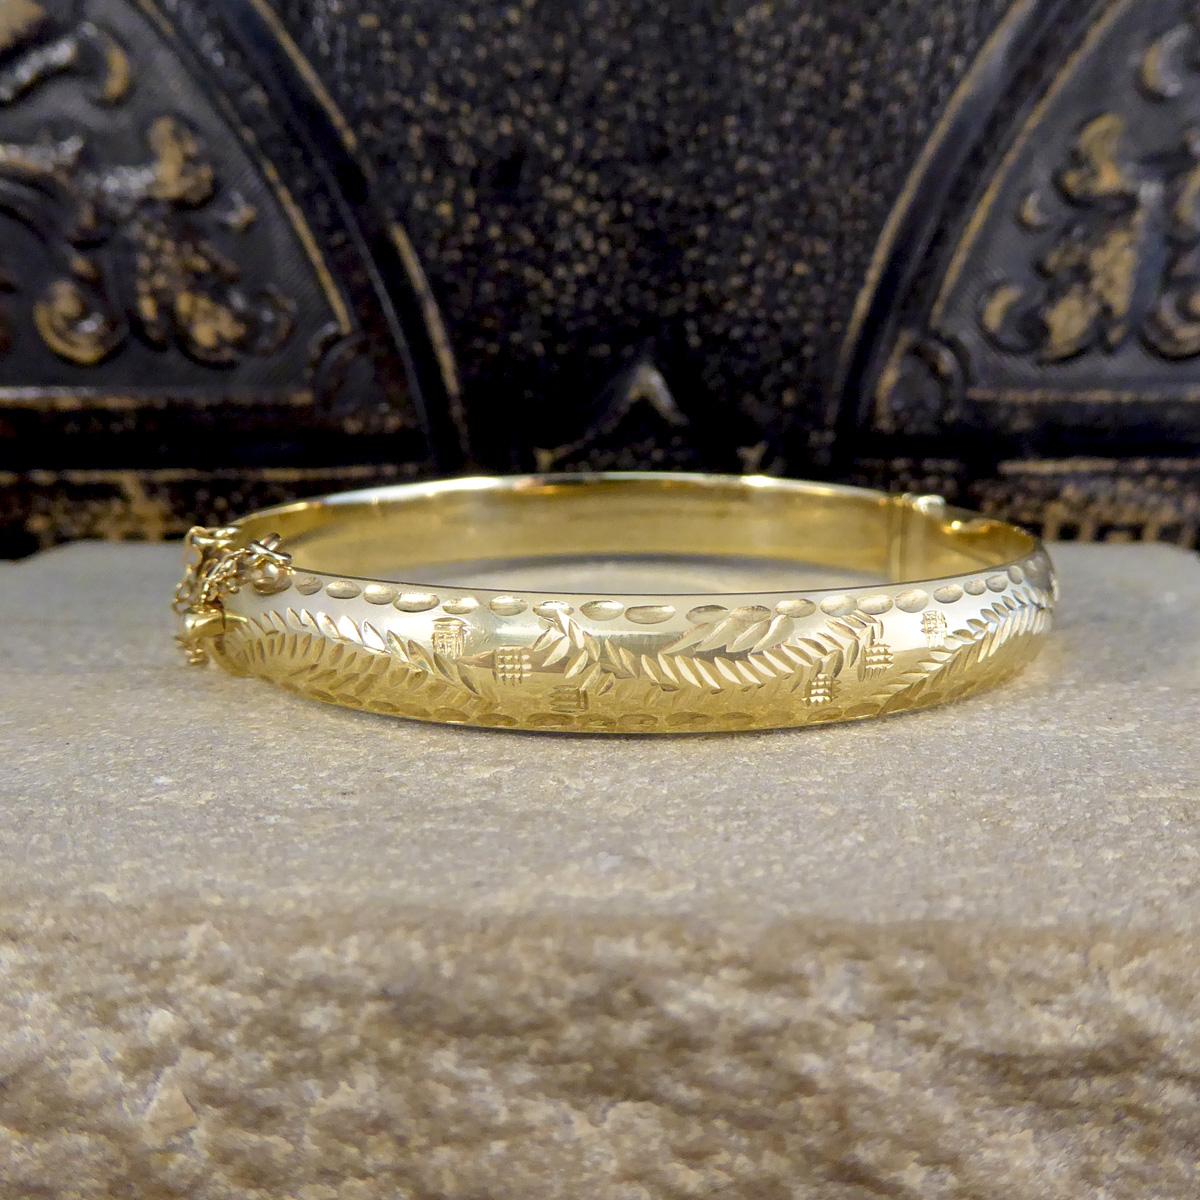 A classic and elegant vintage Gold bangle at the perfect width to be stacked or worn solo. This bangle is hollowed and hinges in the middle with a plain polished back and fully engraved detailed front, enabling it to be worn in two different ways.